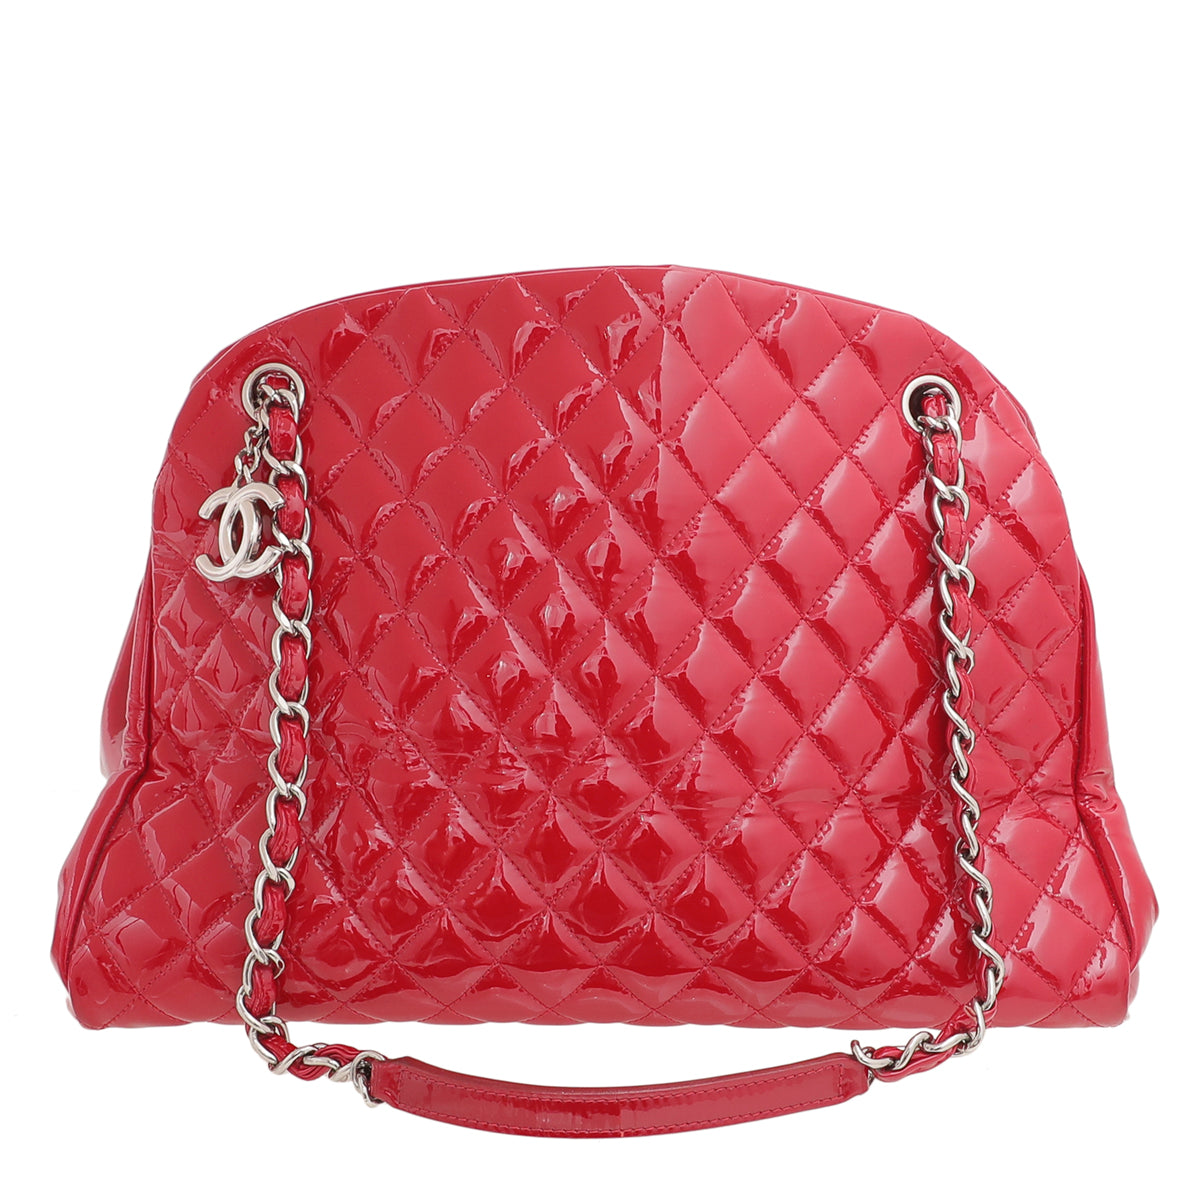 Chanel Red CC Le Mademoiselle Large Bag